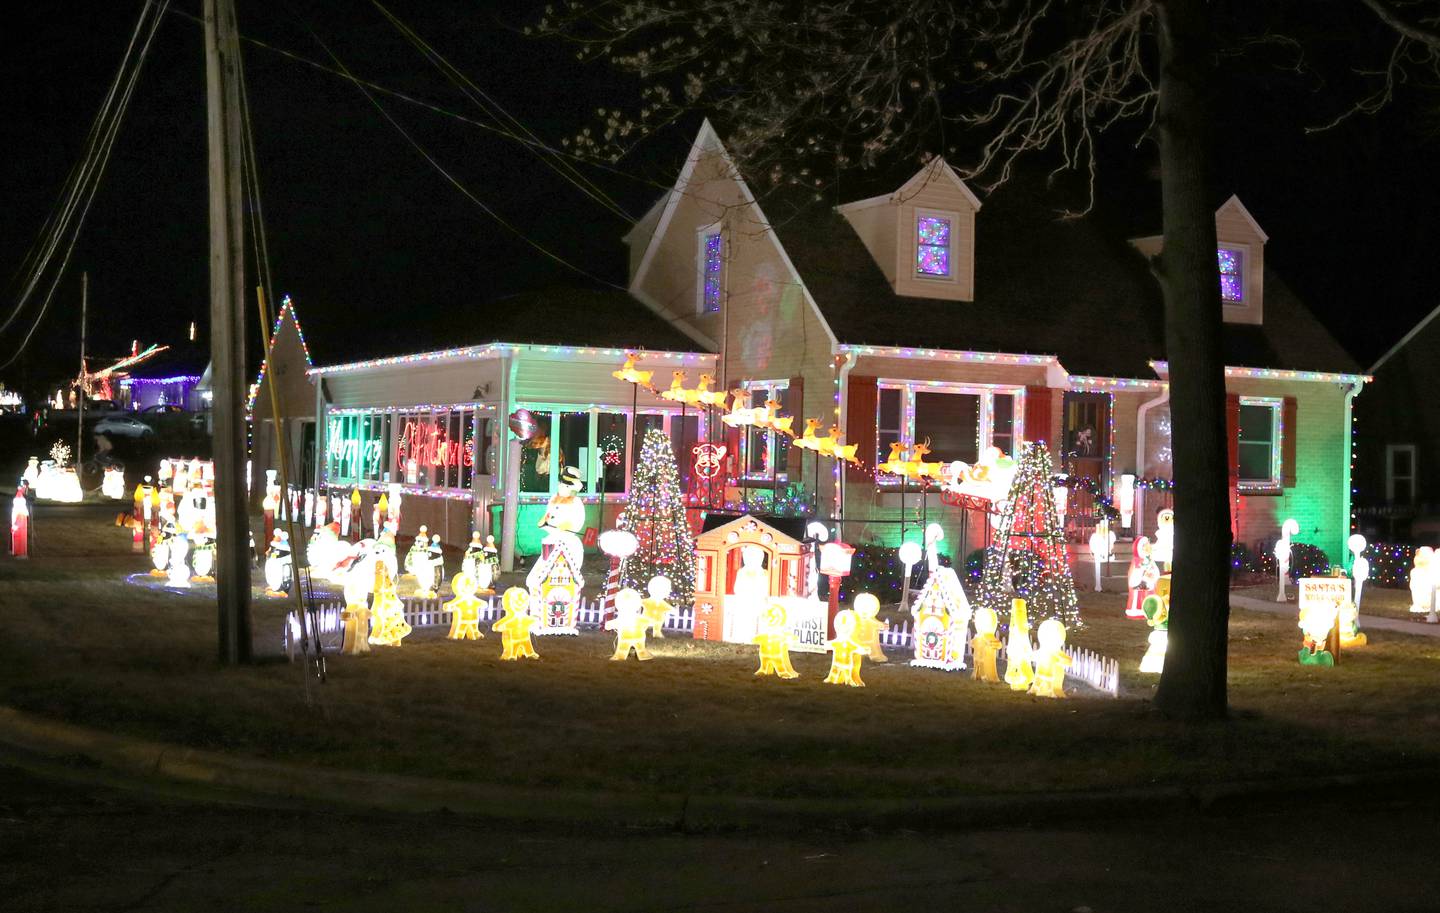 Many homes in DeKalb County were all decked out for the holidays like this one at 202 West Hill Street in Genoa which won first place in the Genoa Area Chamber of Commerce Holiday Light Competition.